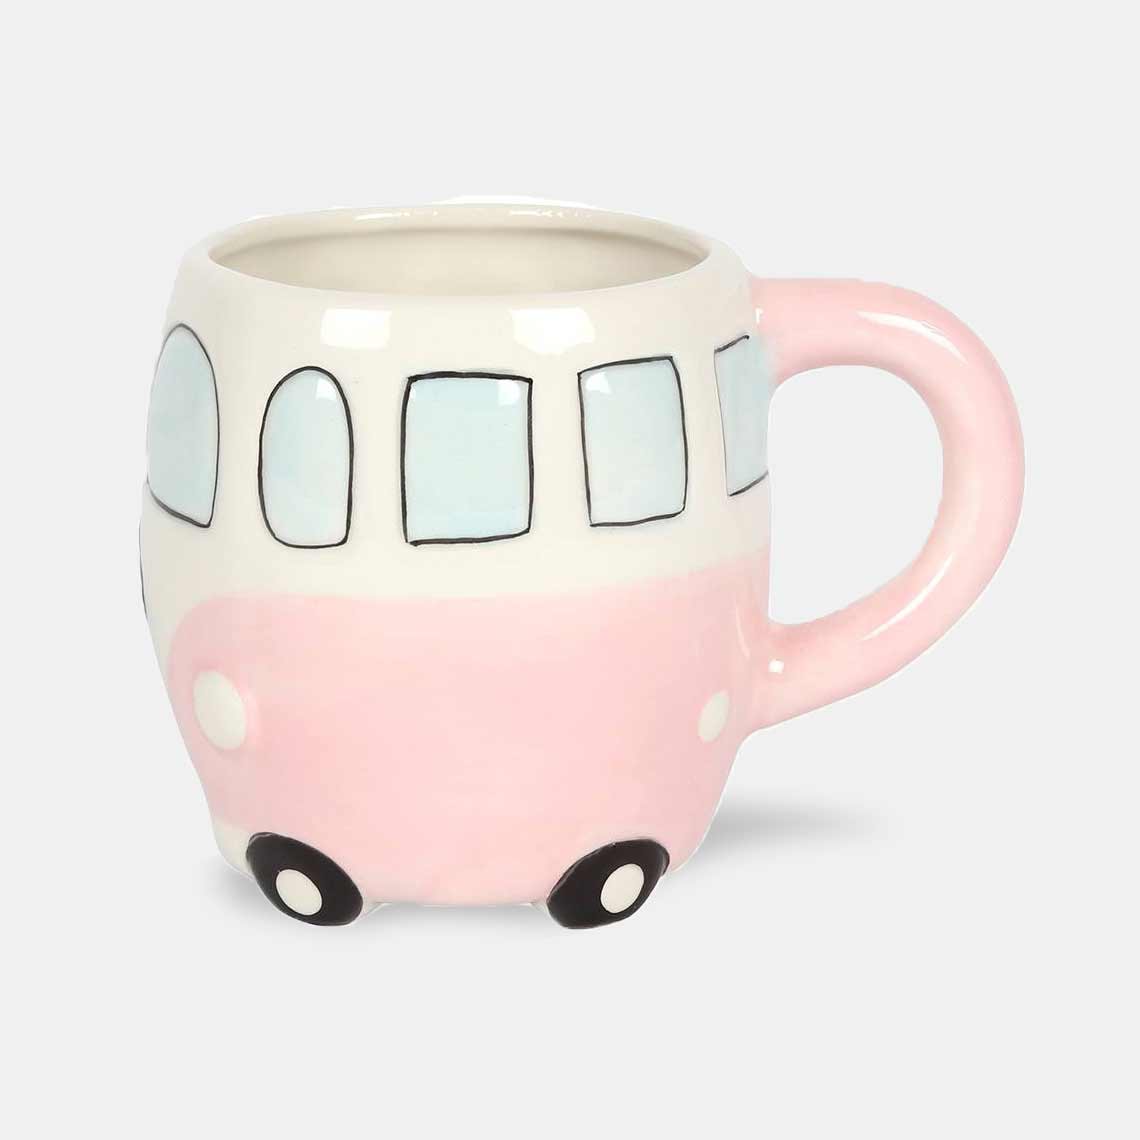 Campervan Novelty Mug in Dark Green and Pale Pink - Mugs and Cups by Jones Home & Gifts